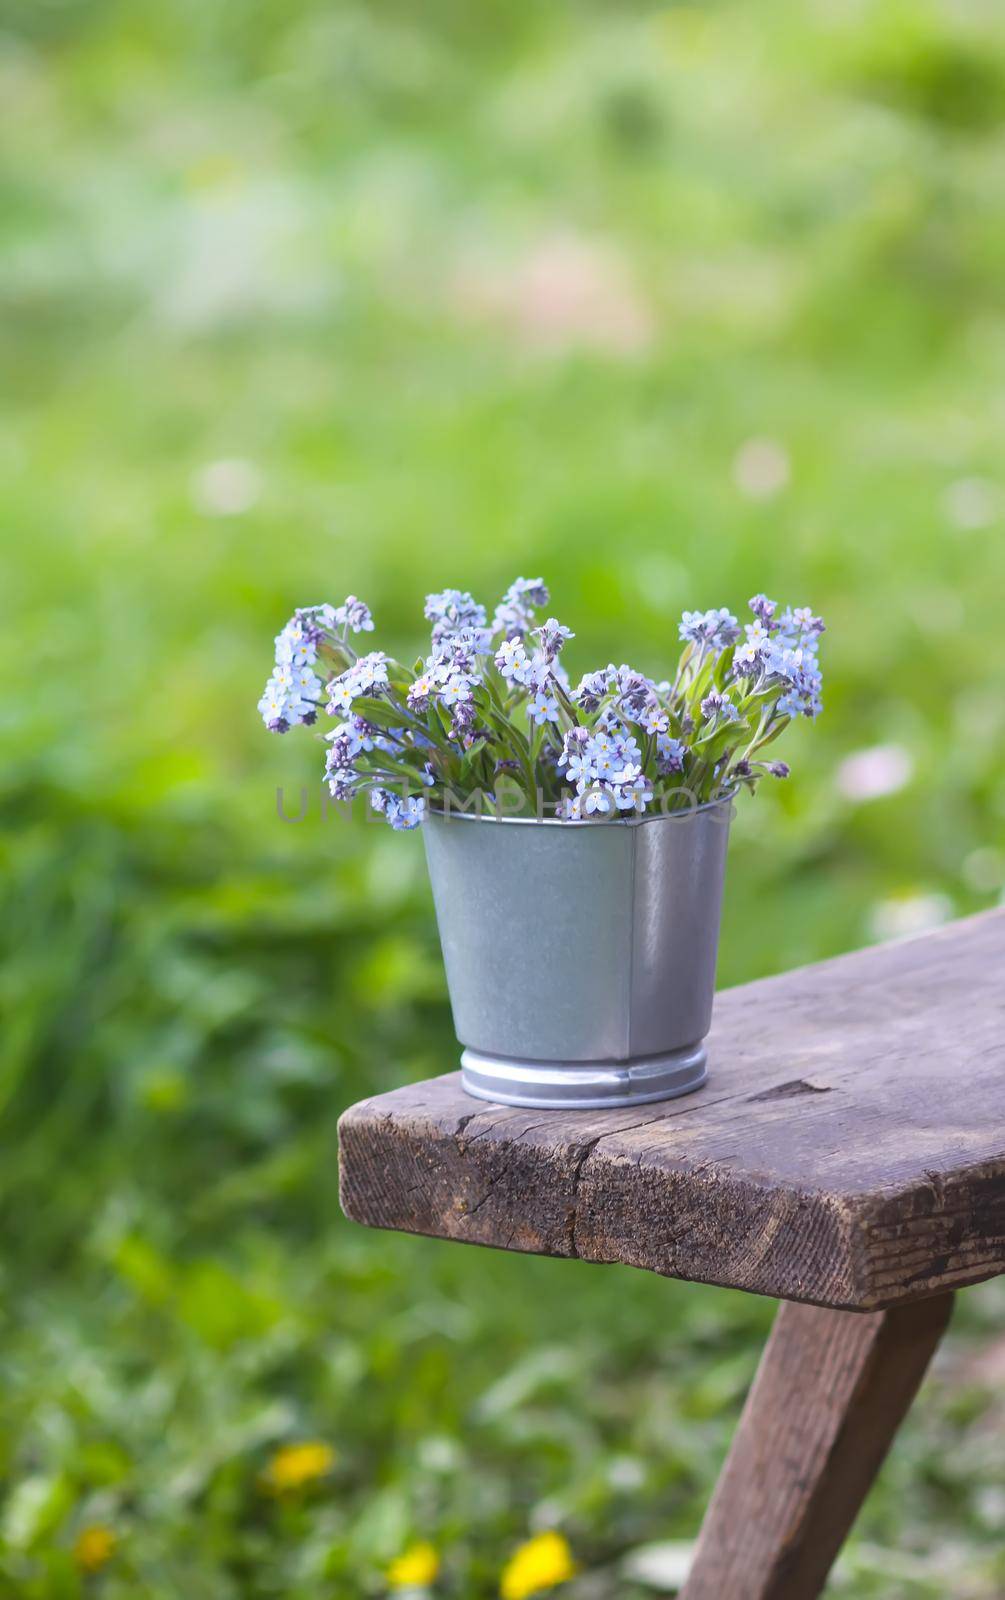 Forget-me-not flowers bouquet outdoors by nightlyviolet